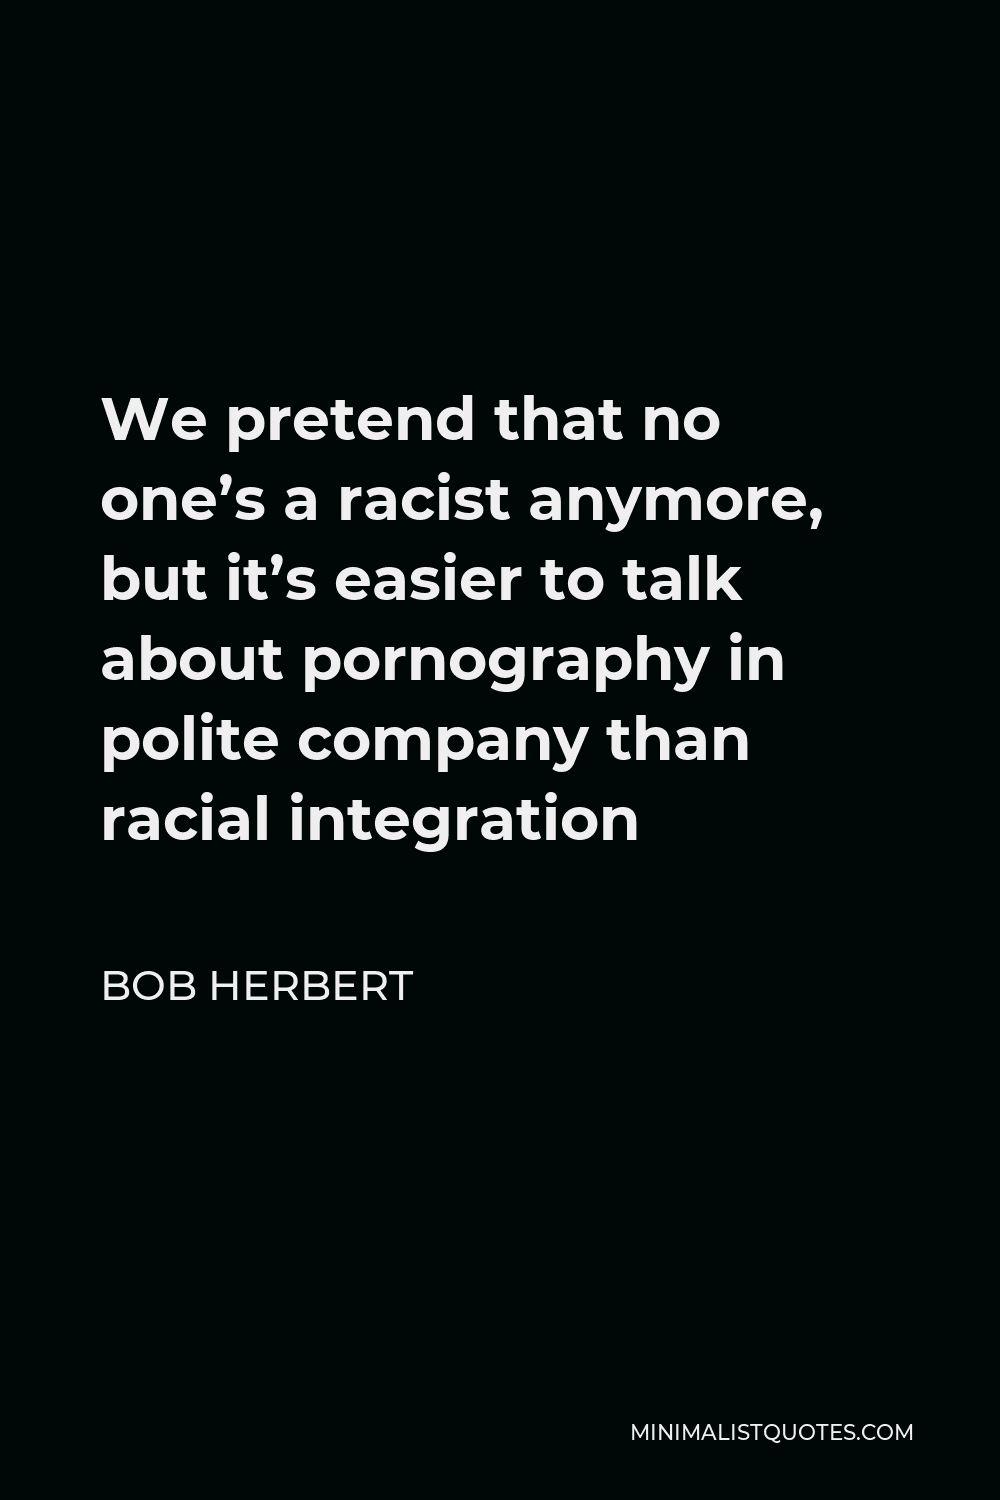 Bob Herbert Quote - We pretend that no one’s a racist anymore, but it’s easier to talk about pornography in polite company than racial integration